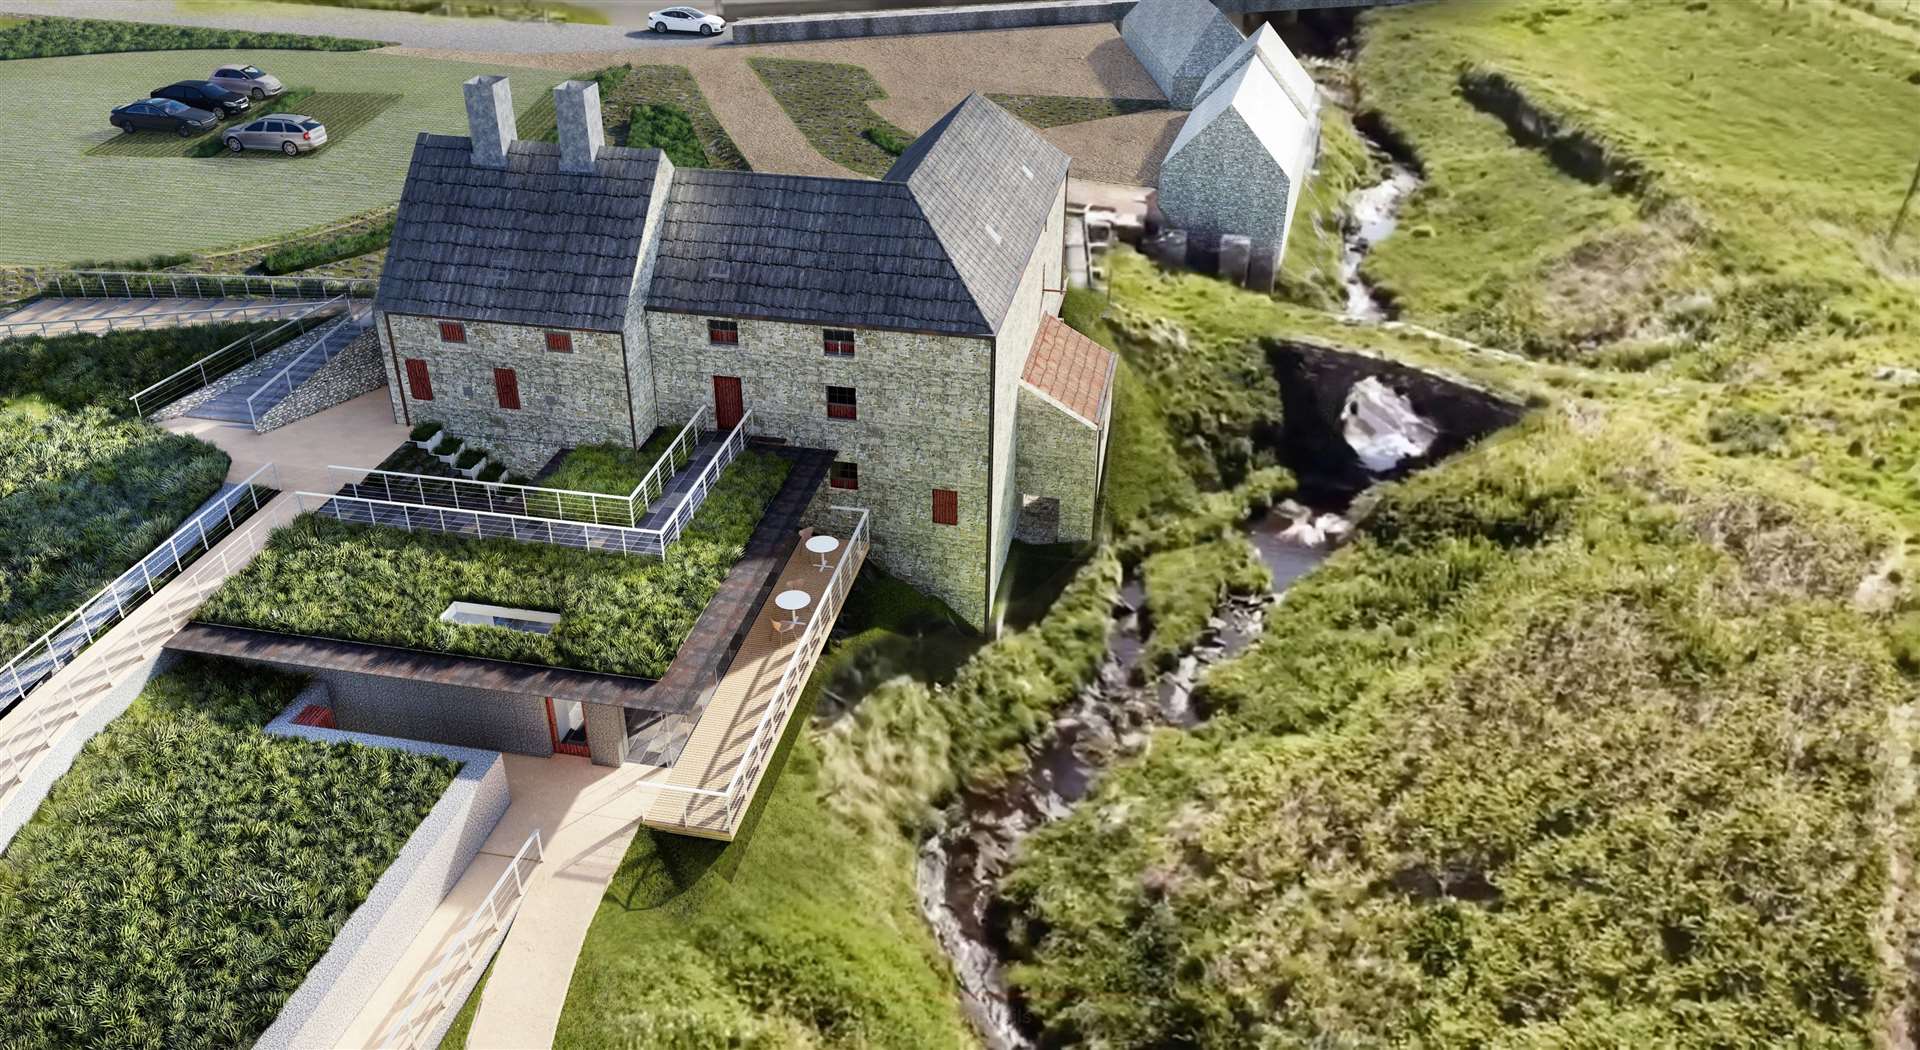 John O’Groats Mill Trust is seeking to turn the historic complex into a social, educational and cultural centre. Image: Enes Pilavci for McGregor Bowes